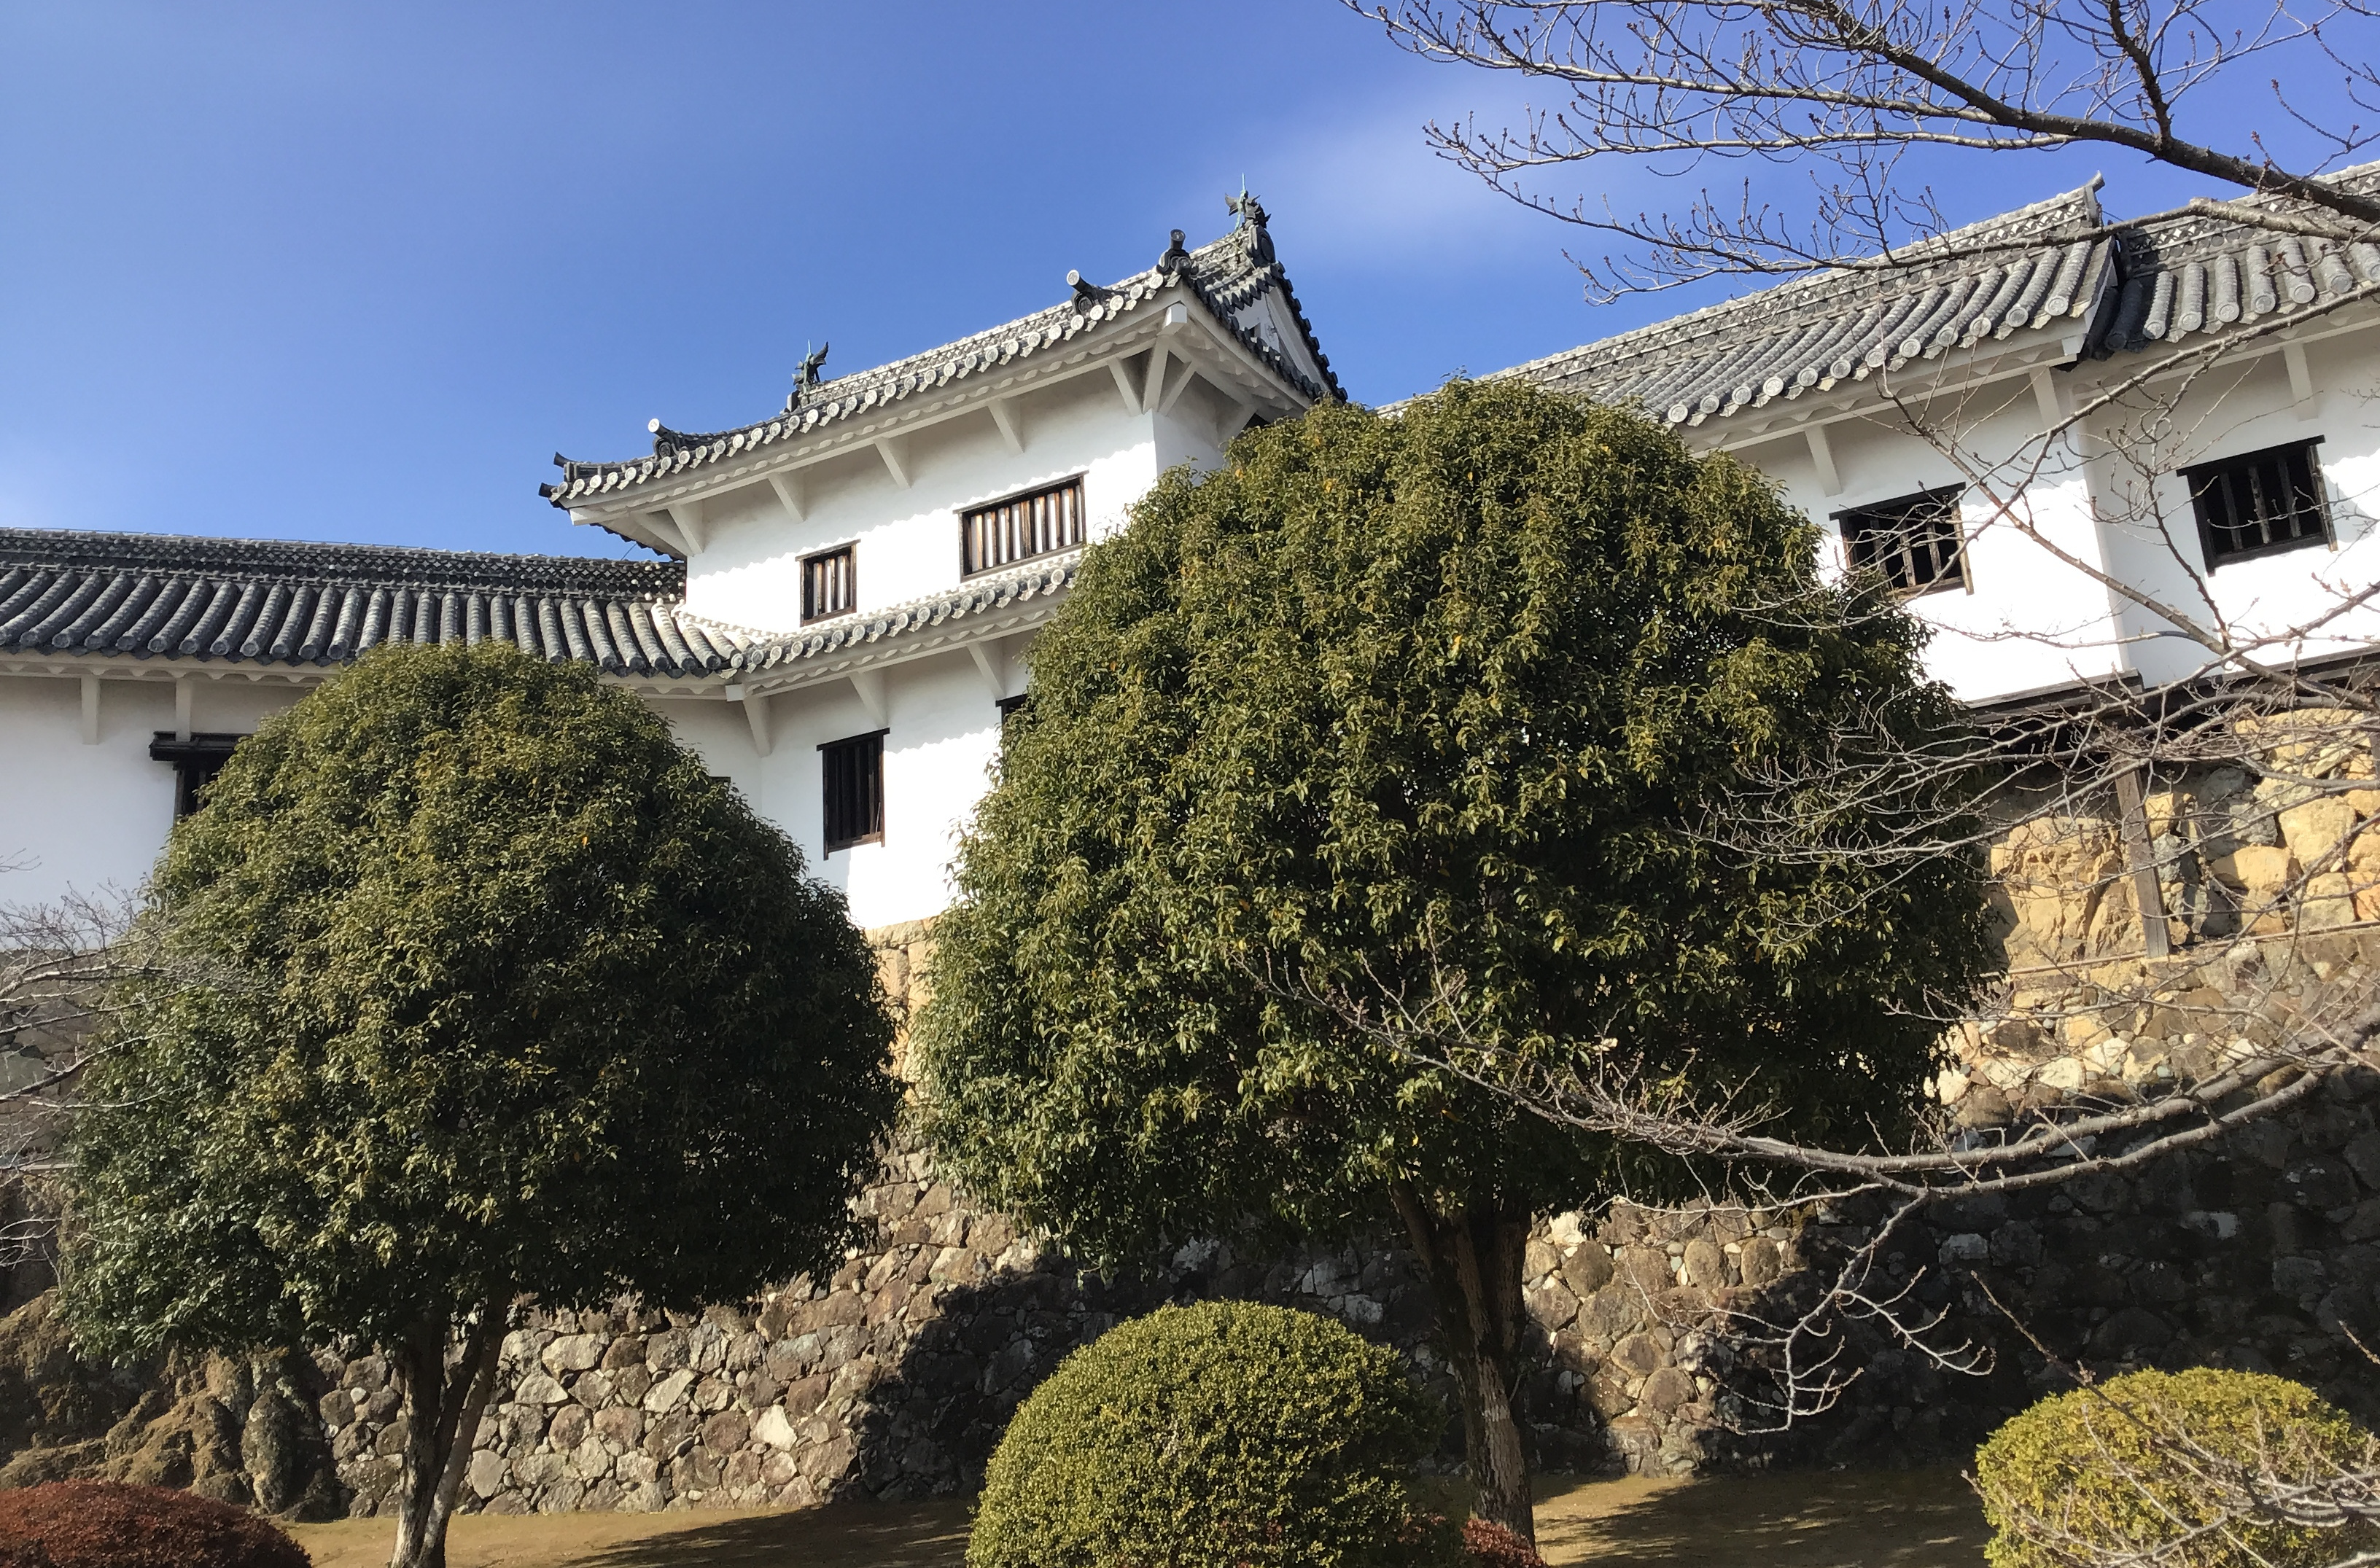 Residential rooms at Himeji Castle